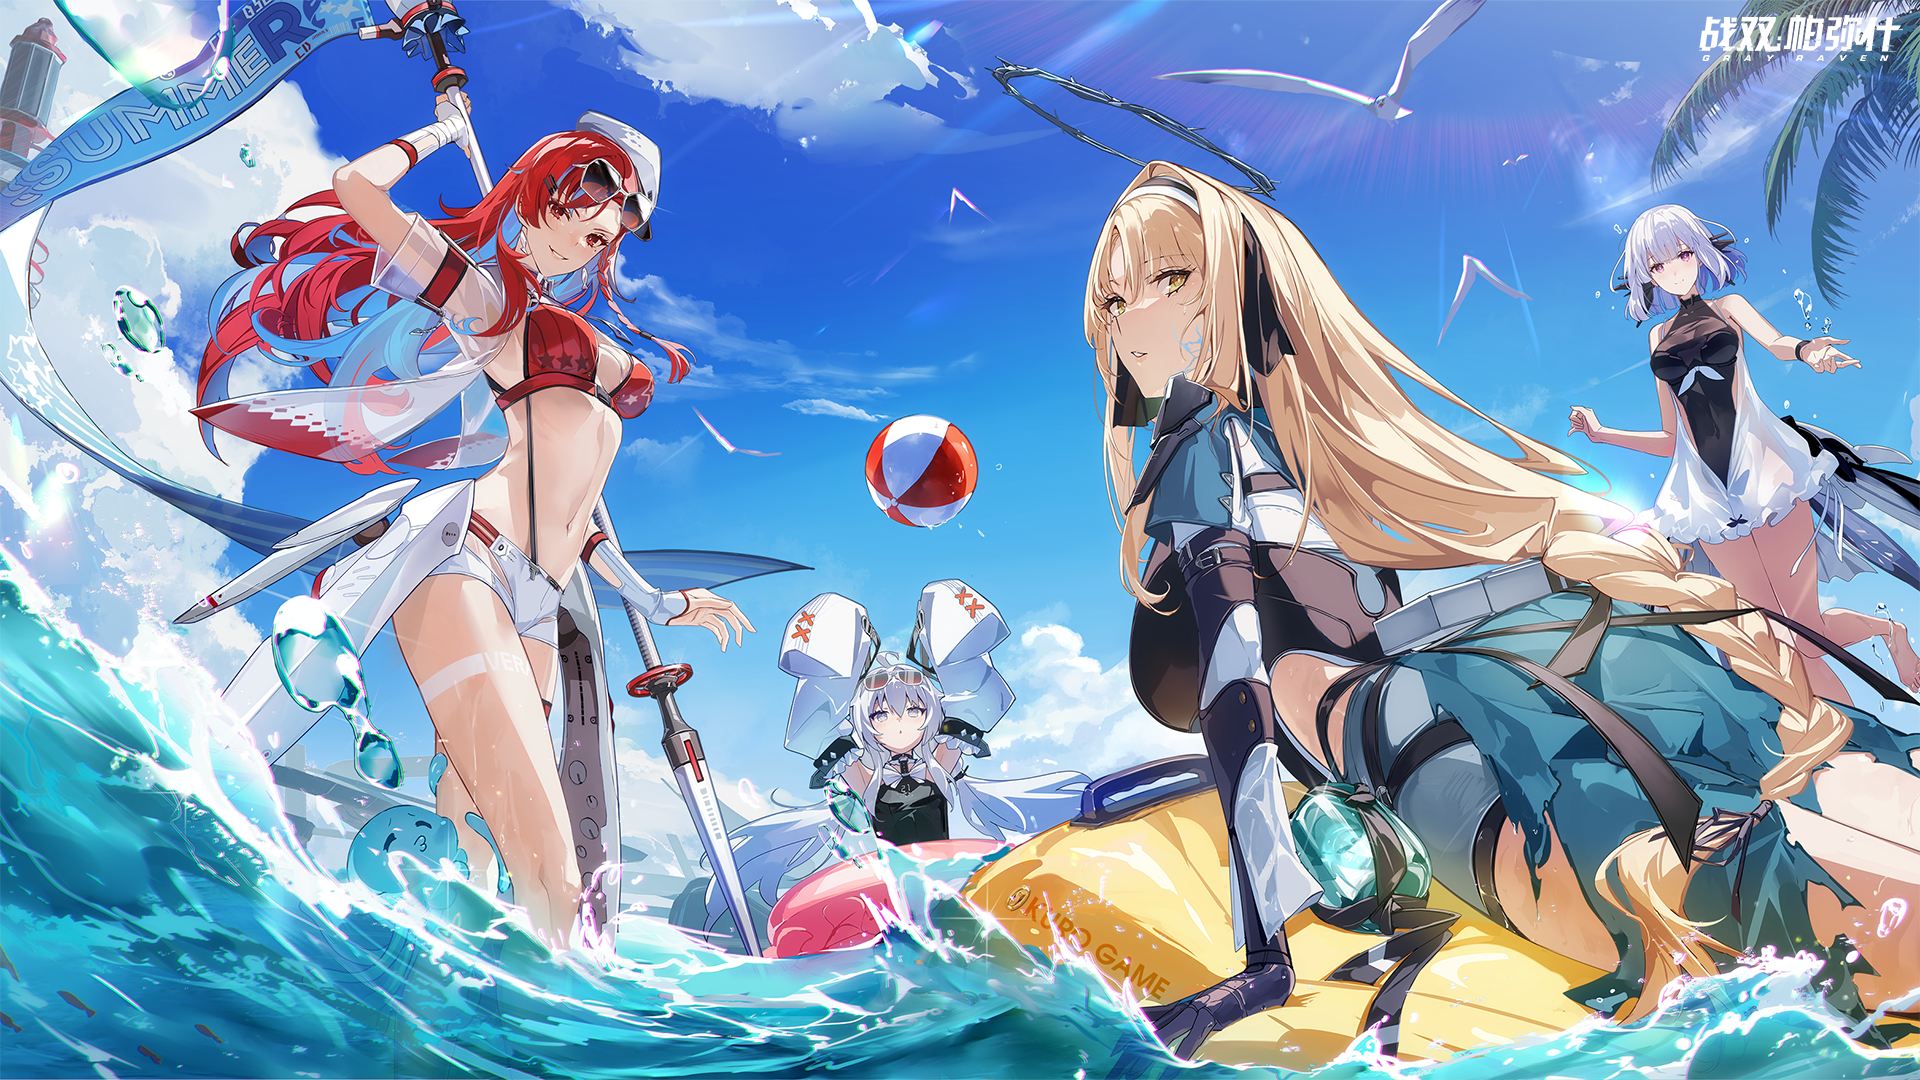 Anime 1920x1080 Punishing: Gray Raven anime games swimwear water beach ball anime girls group of women summer palm trees birds floater air mattress looking at viewer standing in water looking back waves sunglasses